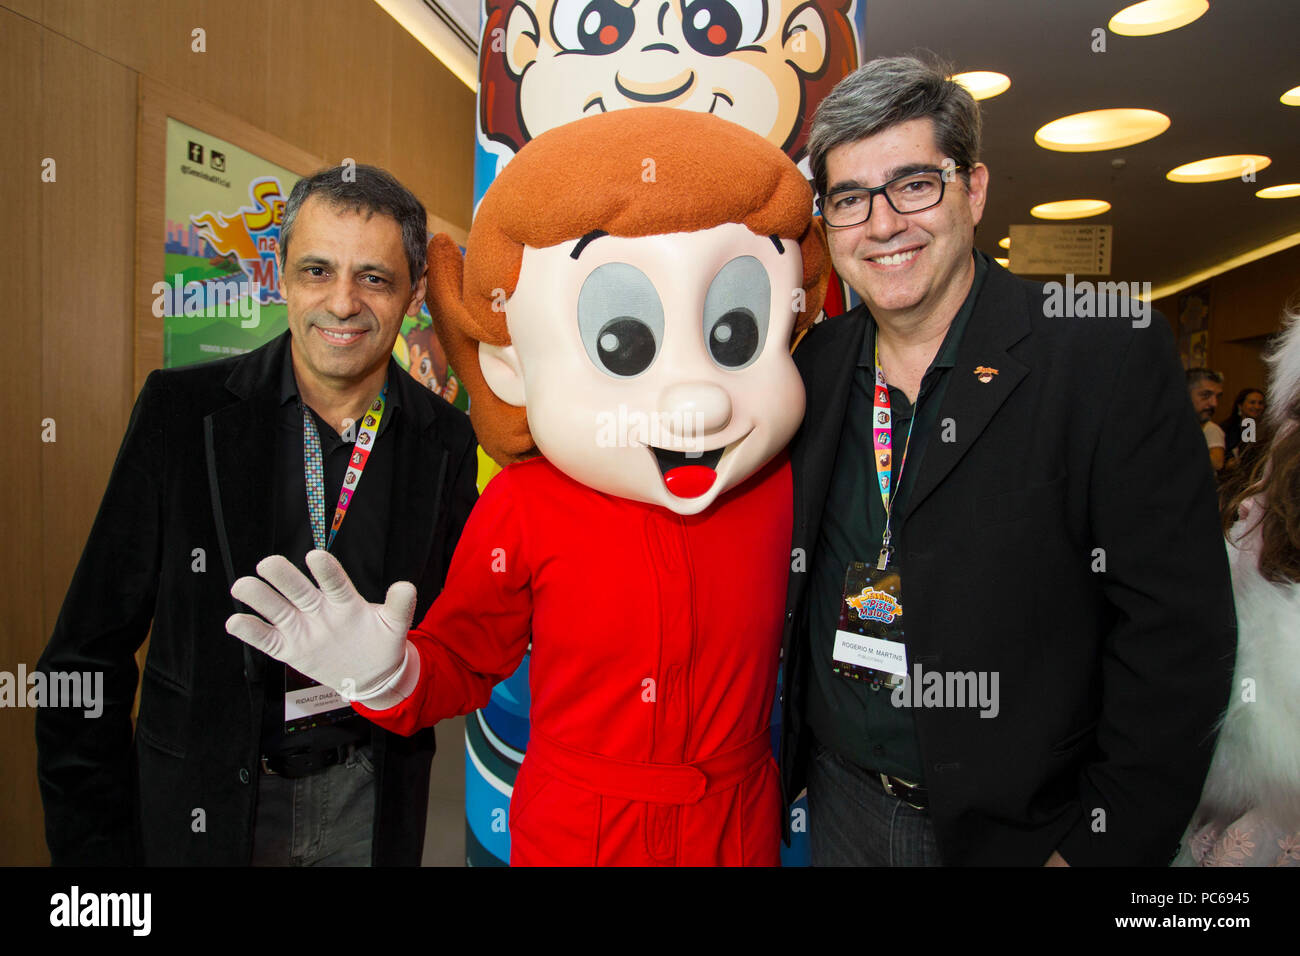 SÃO PAULO, SP - 31.07.2018: ANIMAÇÃO DO SENNINHA É LANÇADA EM SP - This event was held on Tuesday (31) the launch event of the new animated series of the character Senninha that will premiere on 08/08 on Gloobat&#39;s Glat cat channel. The animation that is inspired by three-time For 1 champion Ayrton Senna is called &quotquot;Senninha na Pista Maluca&quot; (&amotquot;Senninha na Pista Maluca&quot;), h has 26 episodes, each withwith 11 minutes, which will be shown daily arious times. In the highlight Ridaut Dias Jrs Jr and Rogério Maryins creators of the character Senninha. (Photo: Emerson San Stock Photo